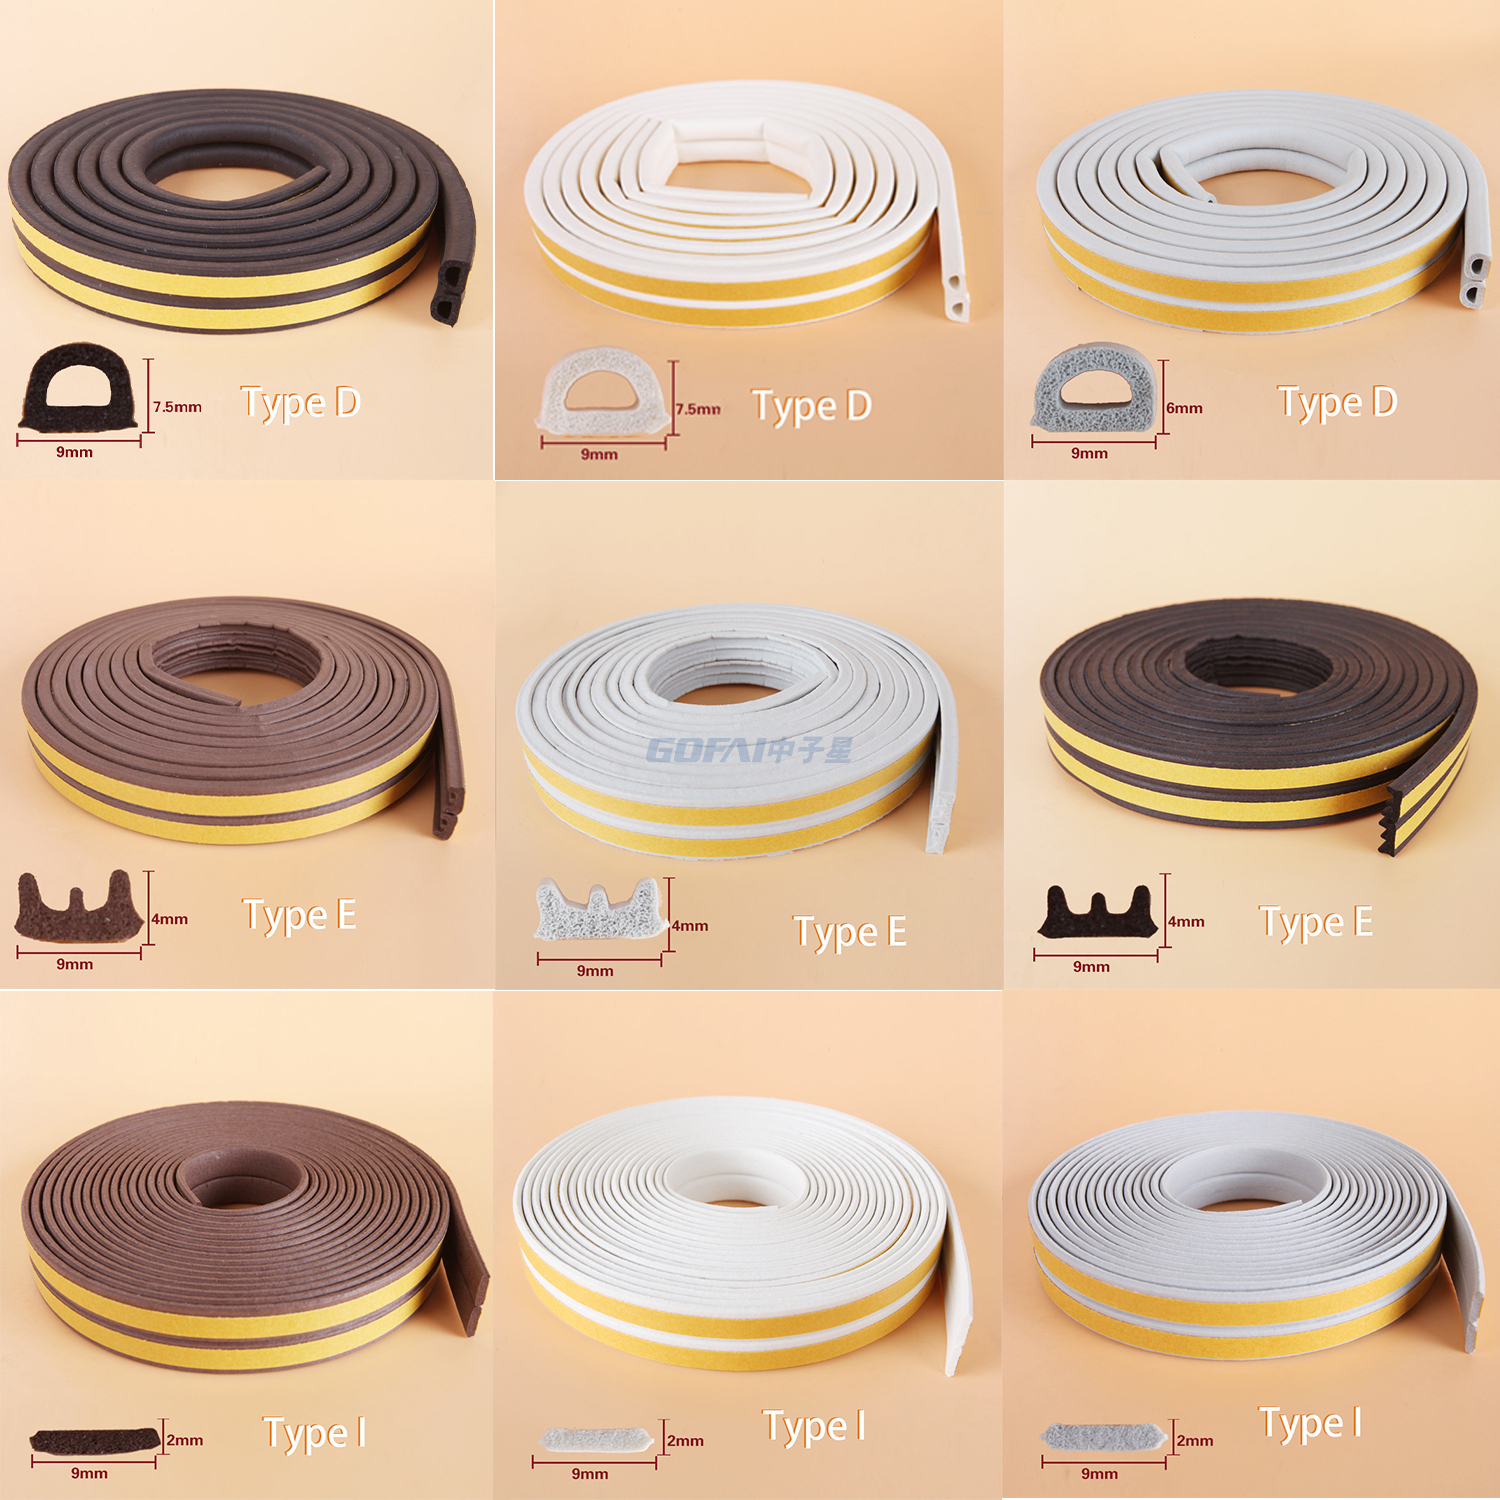 Shape D E I EPDM Self-adhesive Windproof Sound Insulation Sealing Strip For Door And Window